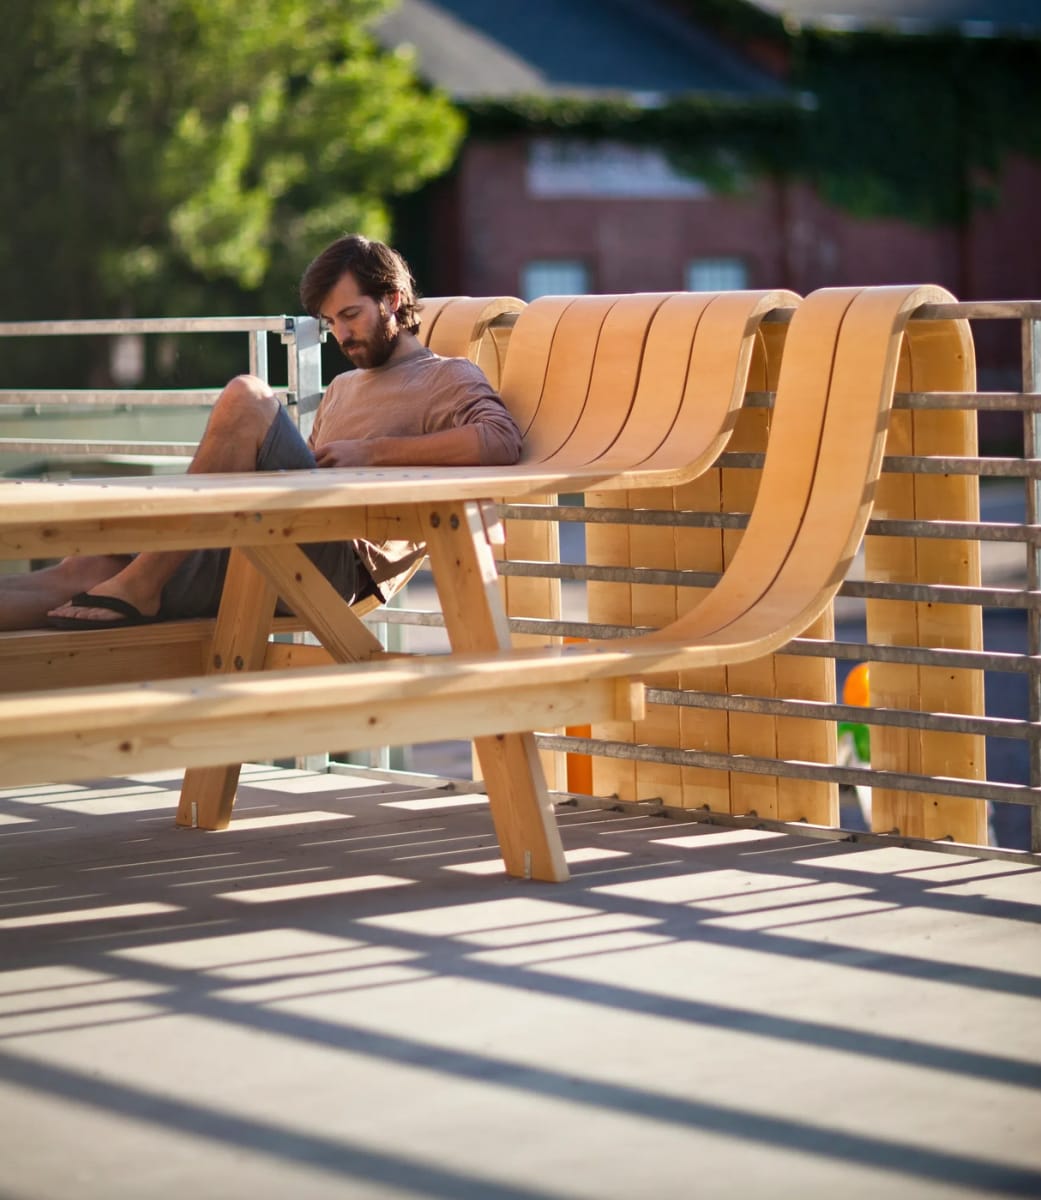 The Picnic Table by Michael Beitz  Image: photo: Michael Beitz